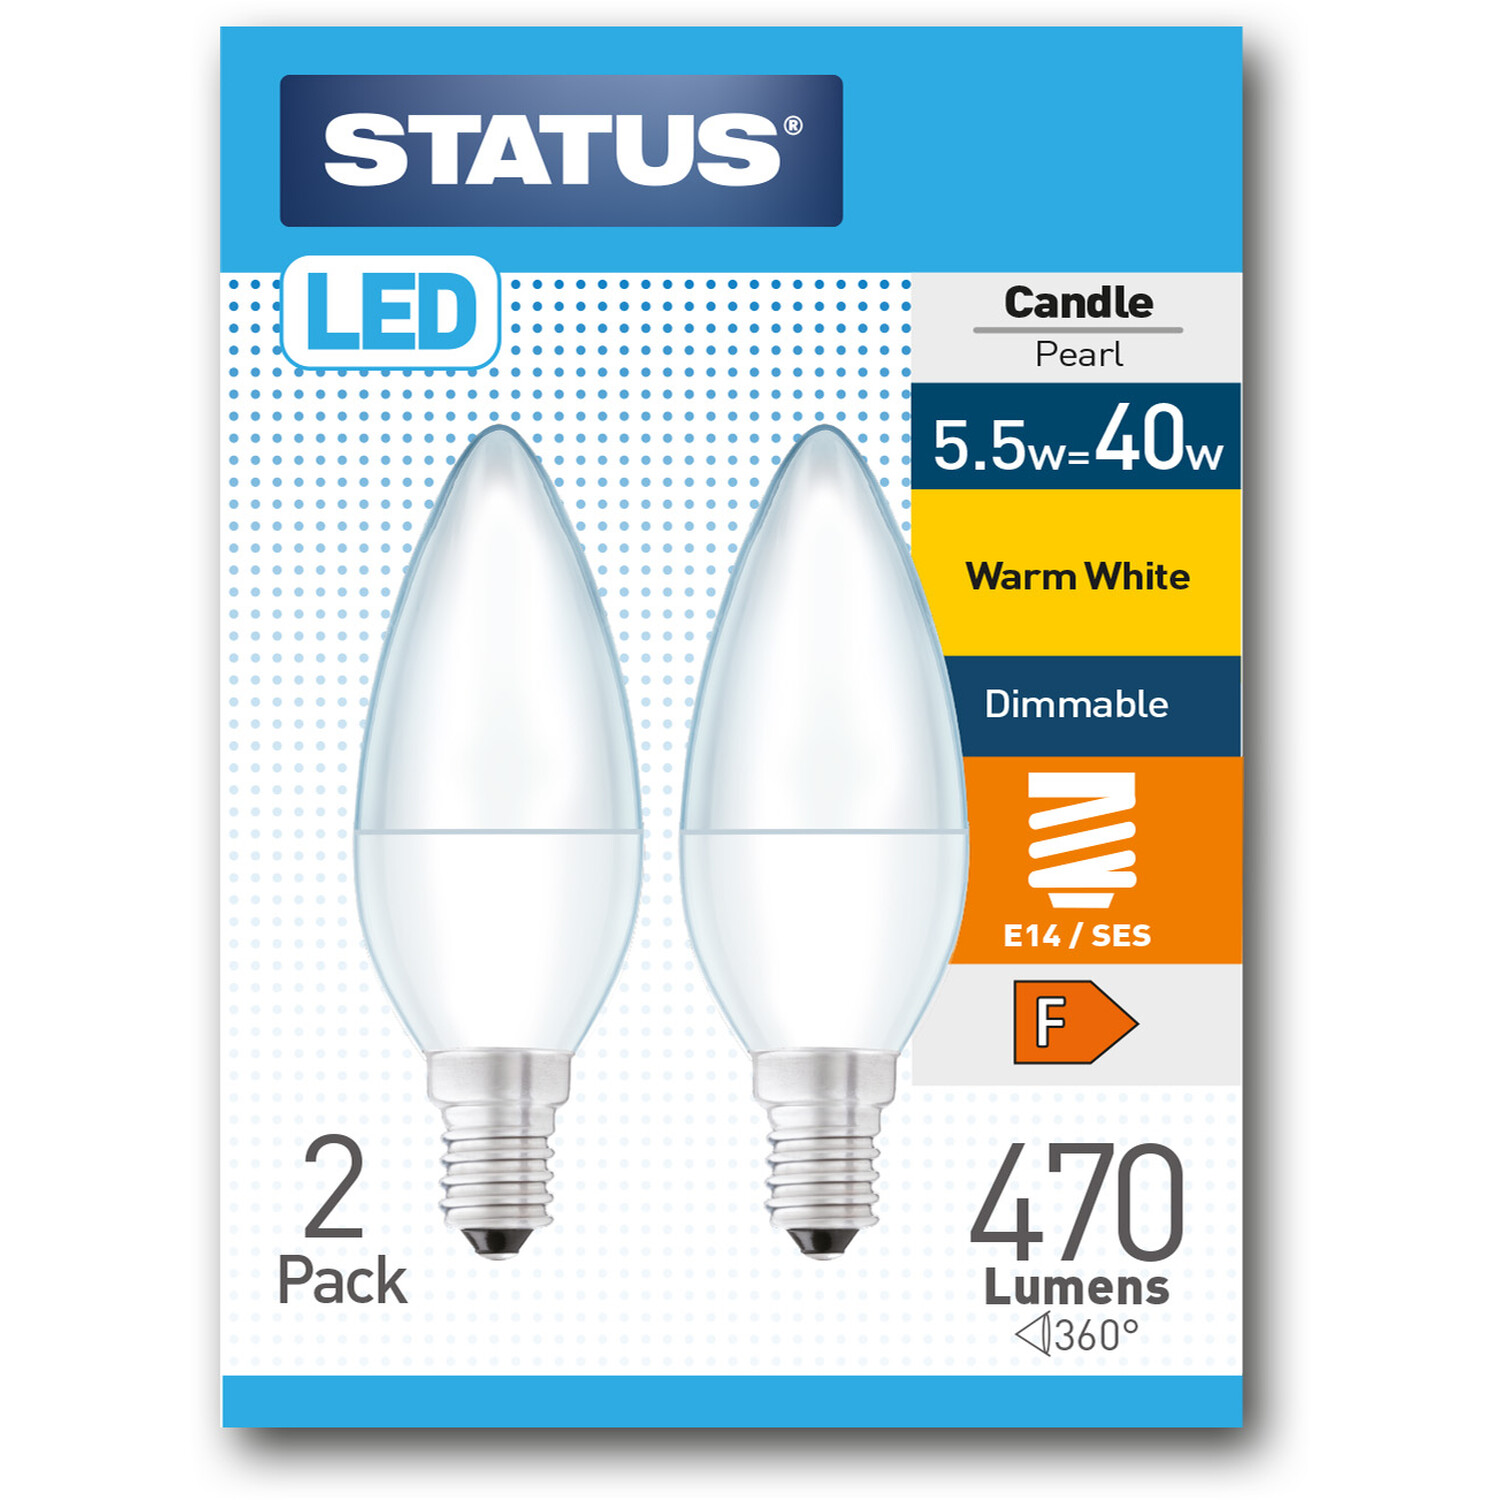 Pack of 2 5.5w LED Candle SES Pearl Image 1